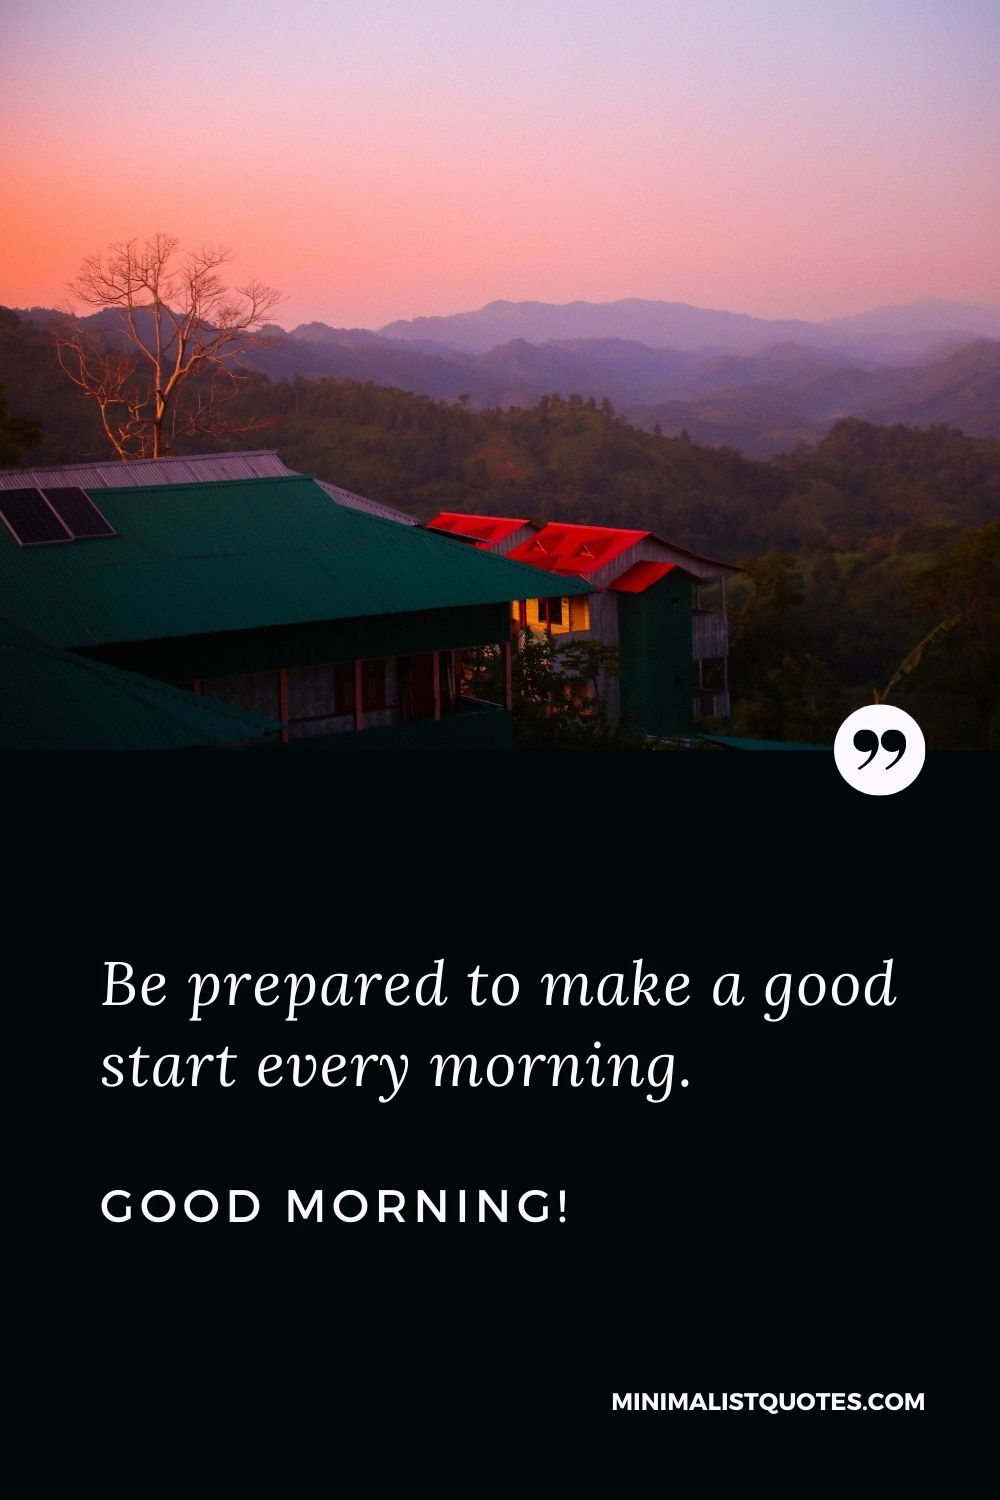 Morning Quote & Message With Image: Be prepared to make a good start every morning. Good Morning!